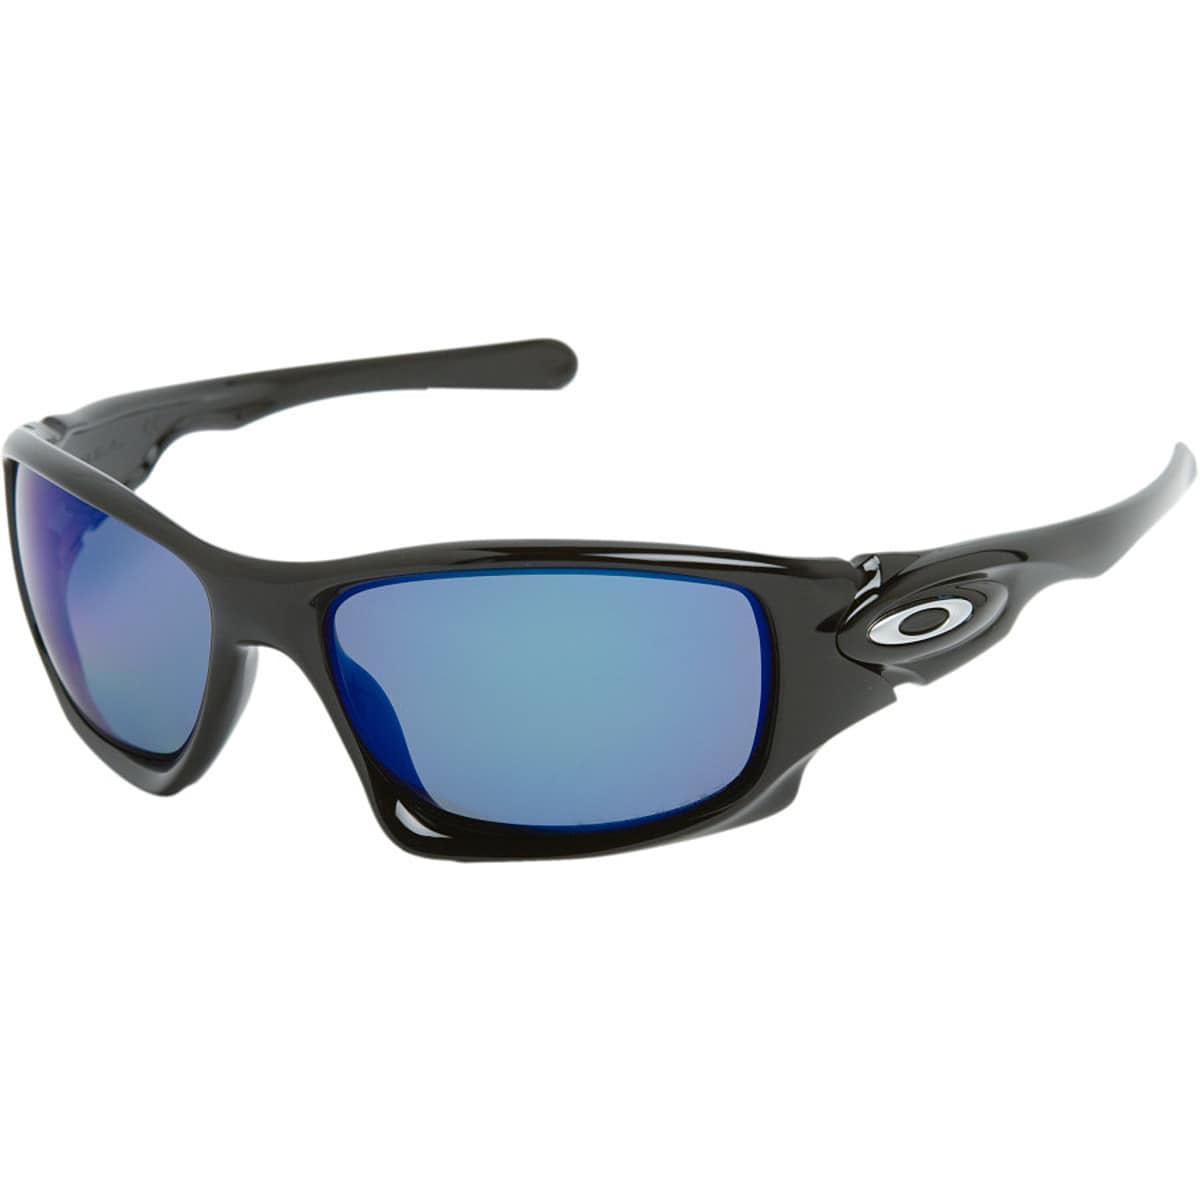 Tak for din hjælp Ministerium tro Oakley Ten Angling Specific Polarized Sunglasses - Accessories